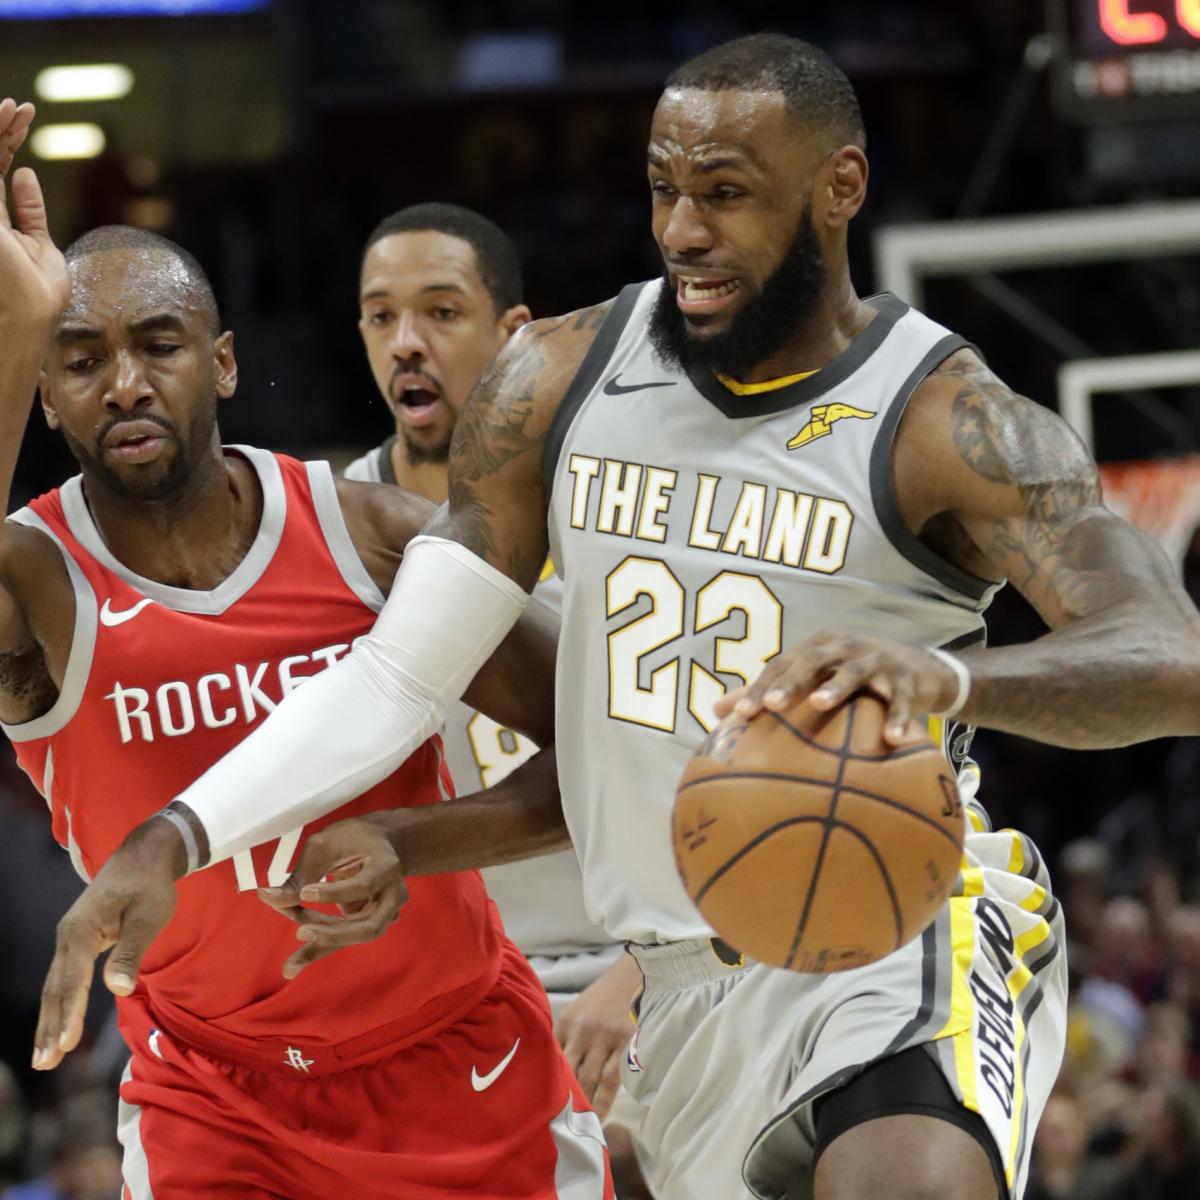 Pressure is on as James Harden saddles in next to another All-Star